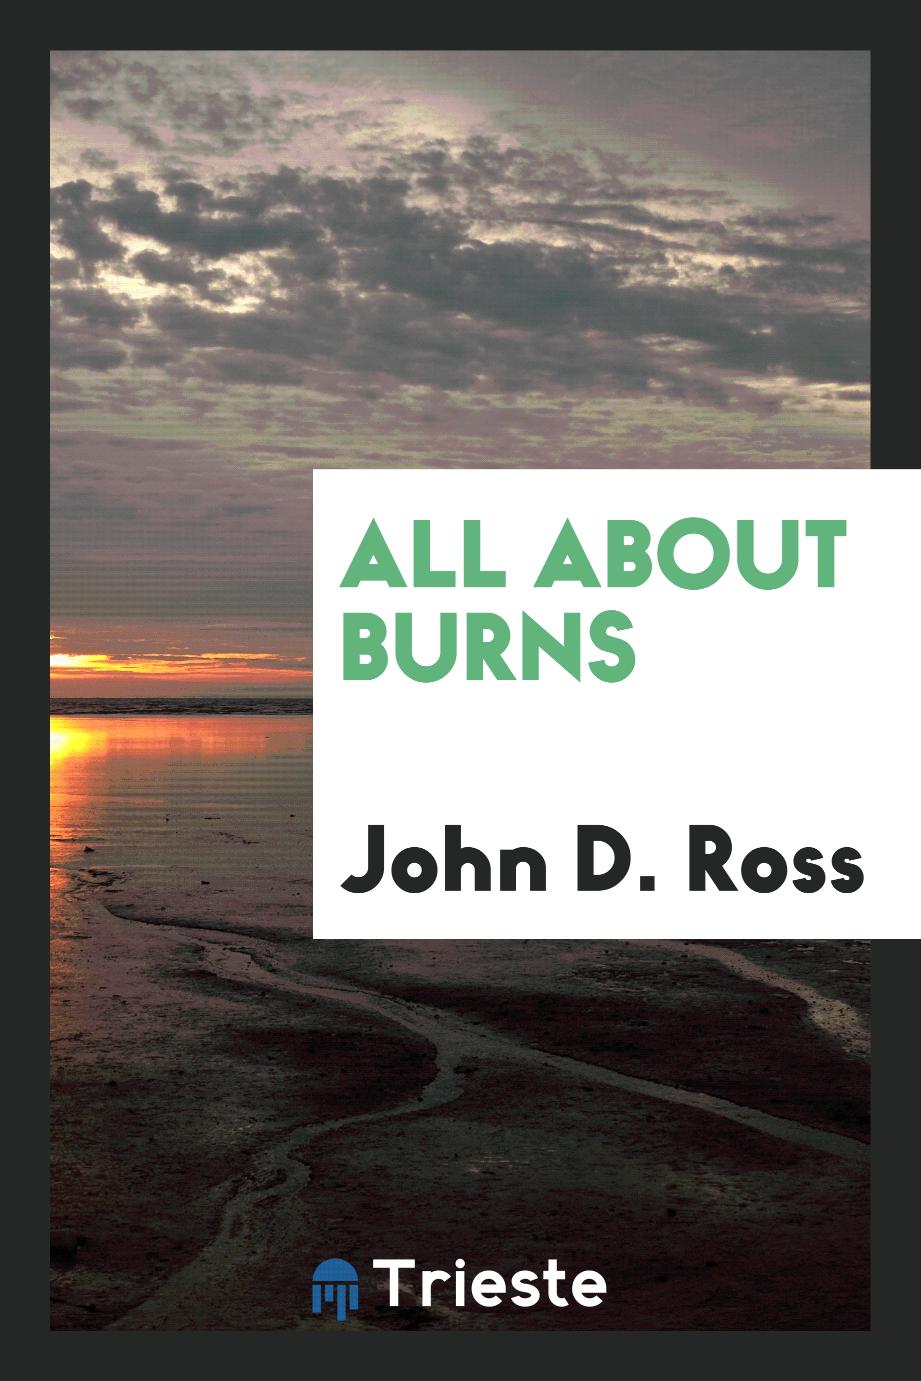 All about Burns